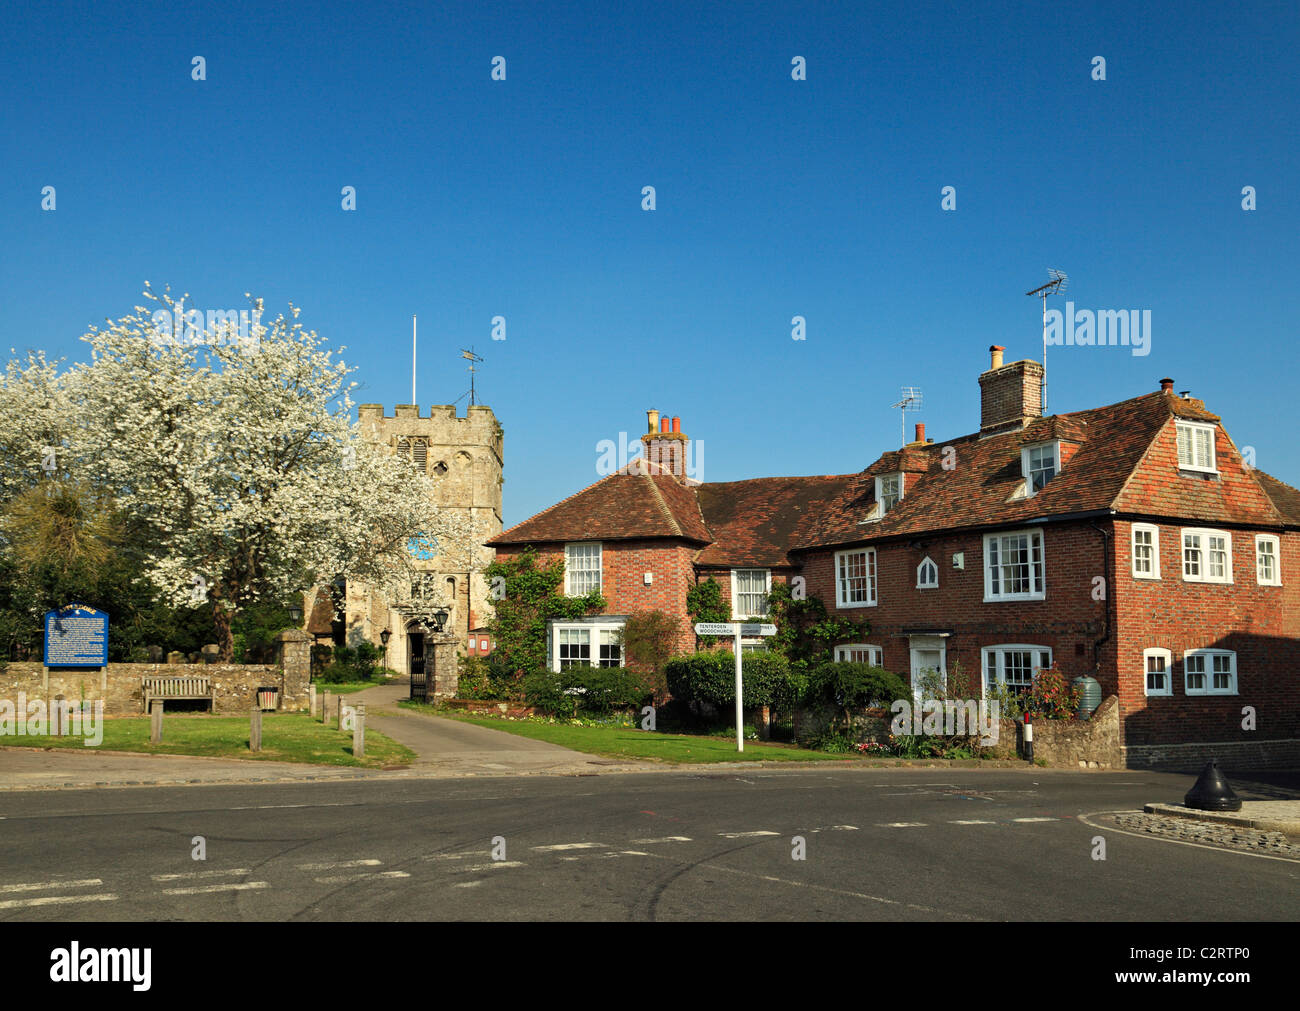 The Kentish village of Appledore, and church of St Peter & St Paul. Stock Photo